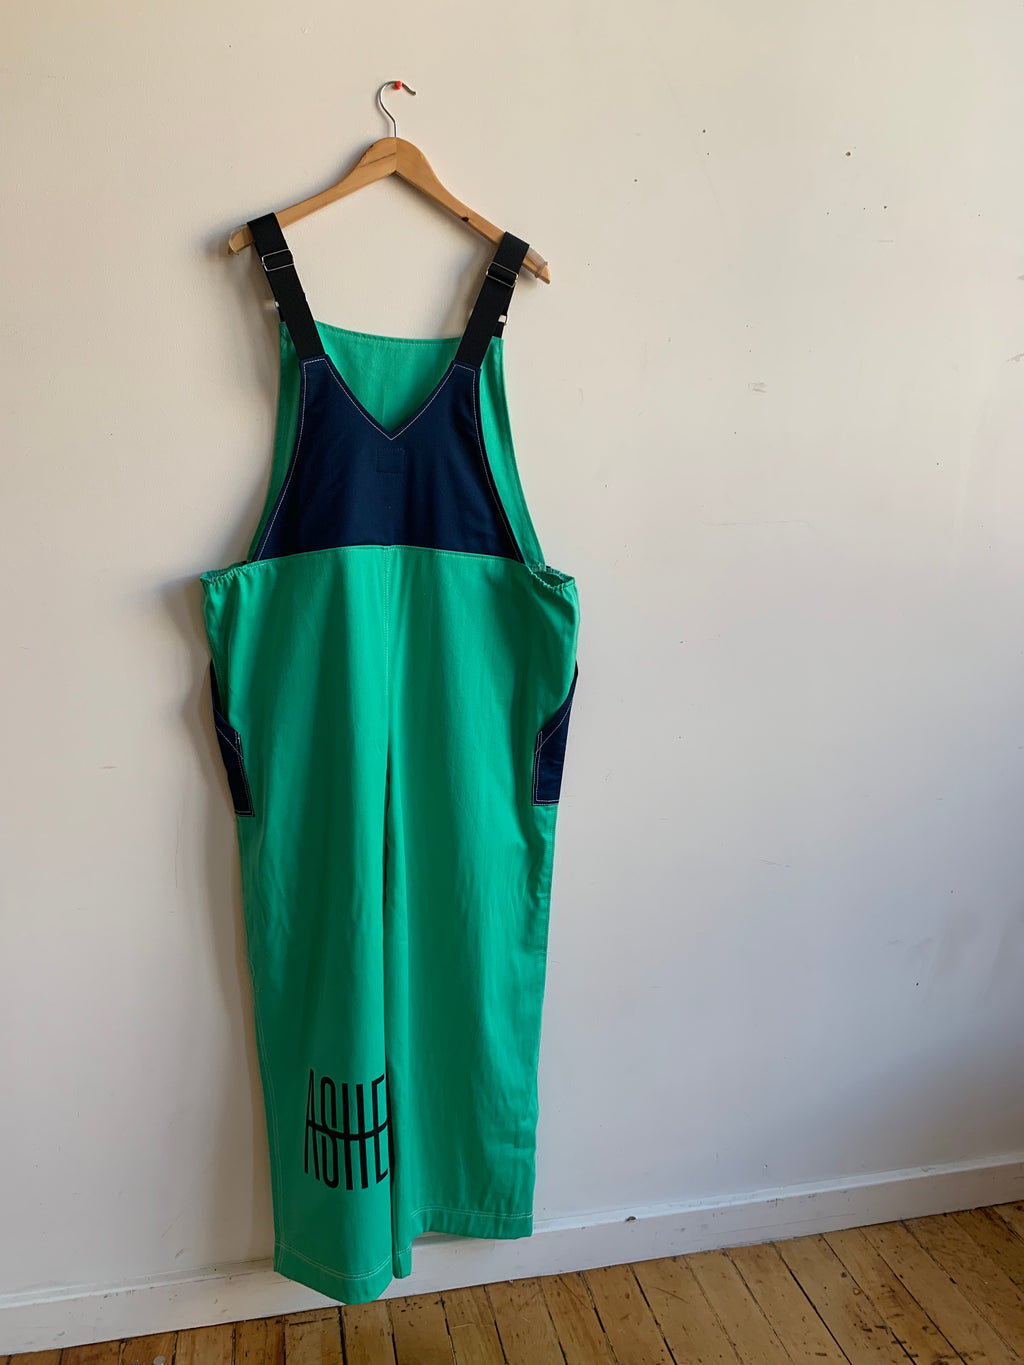 OVERALLS - MINTY/NAVY DEADSTOCK FABRIC